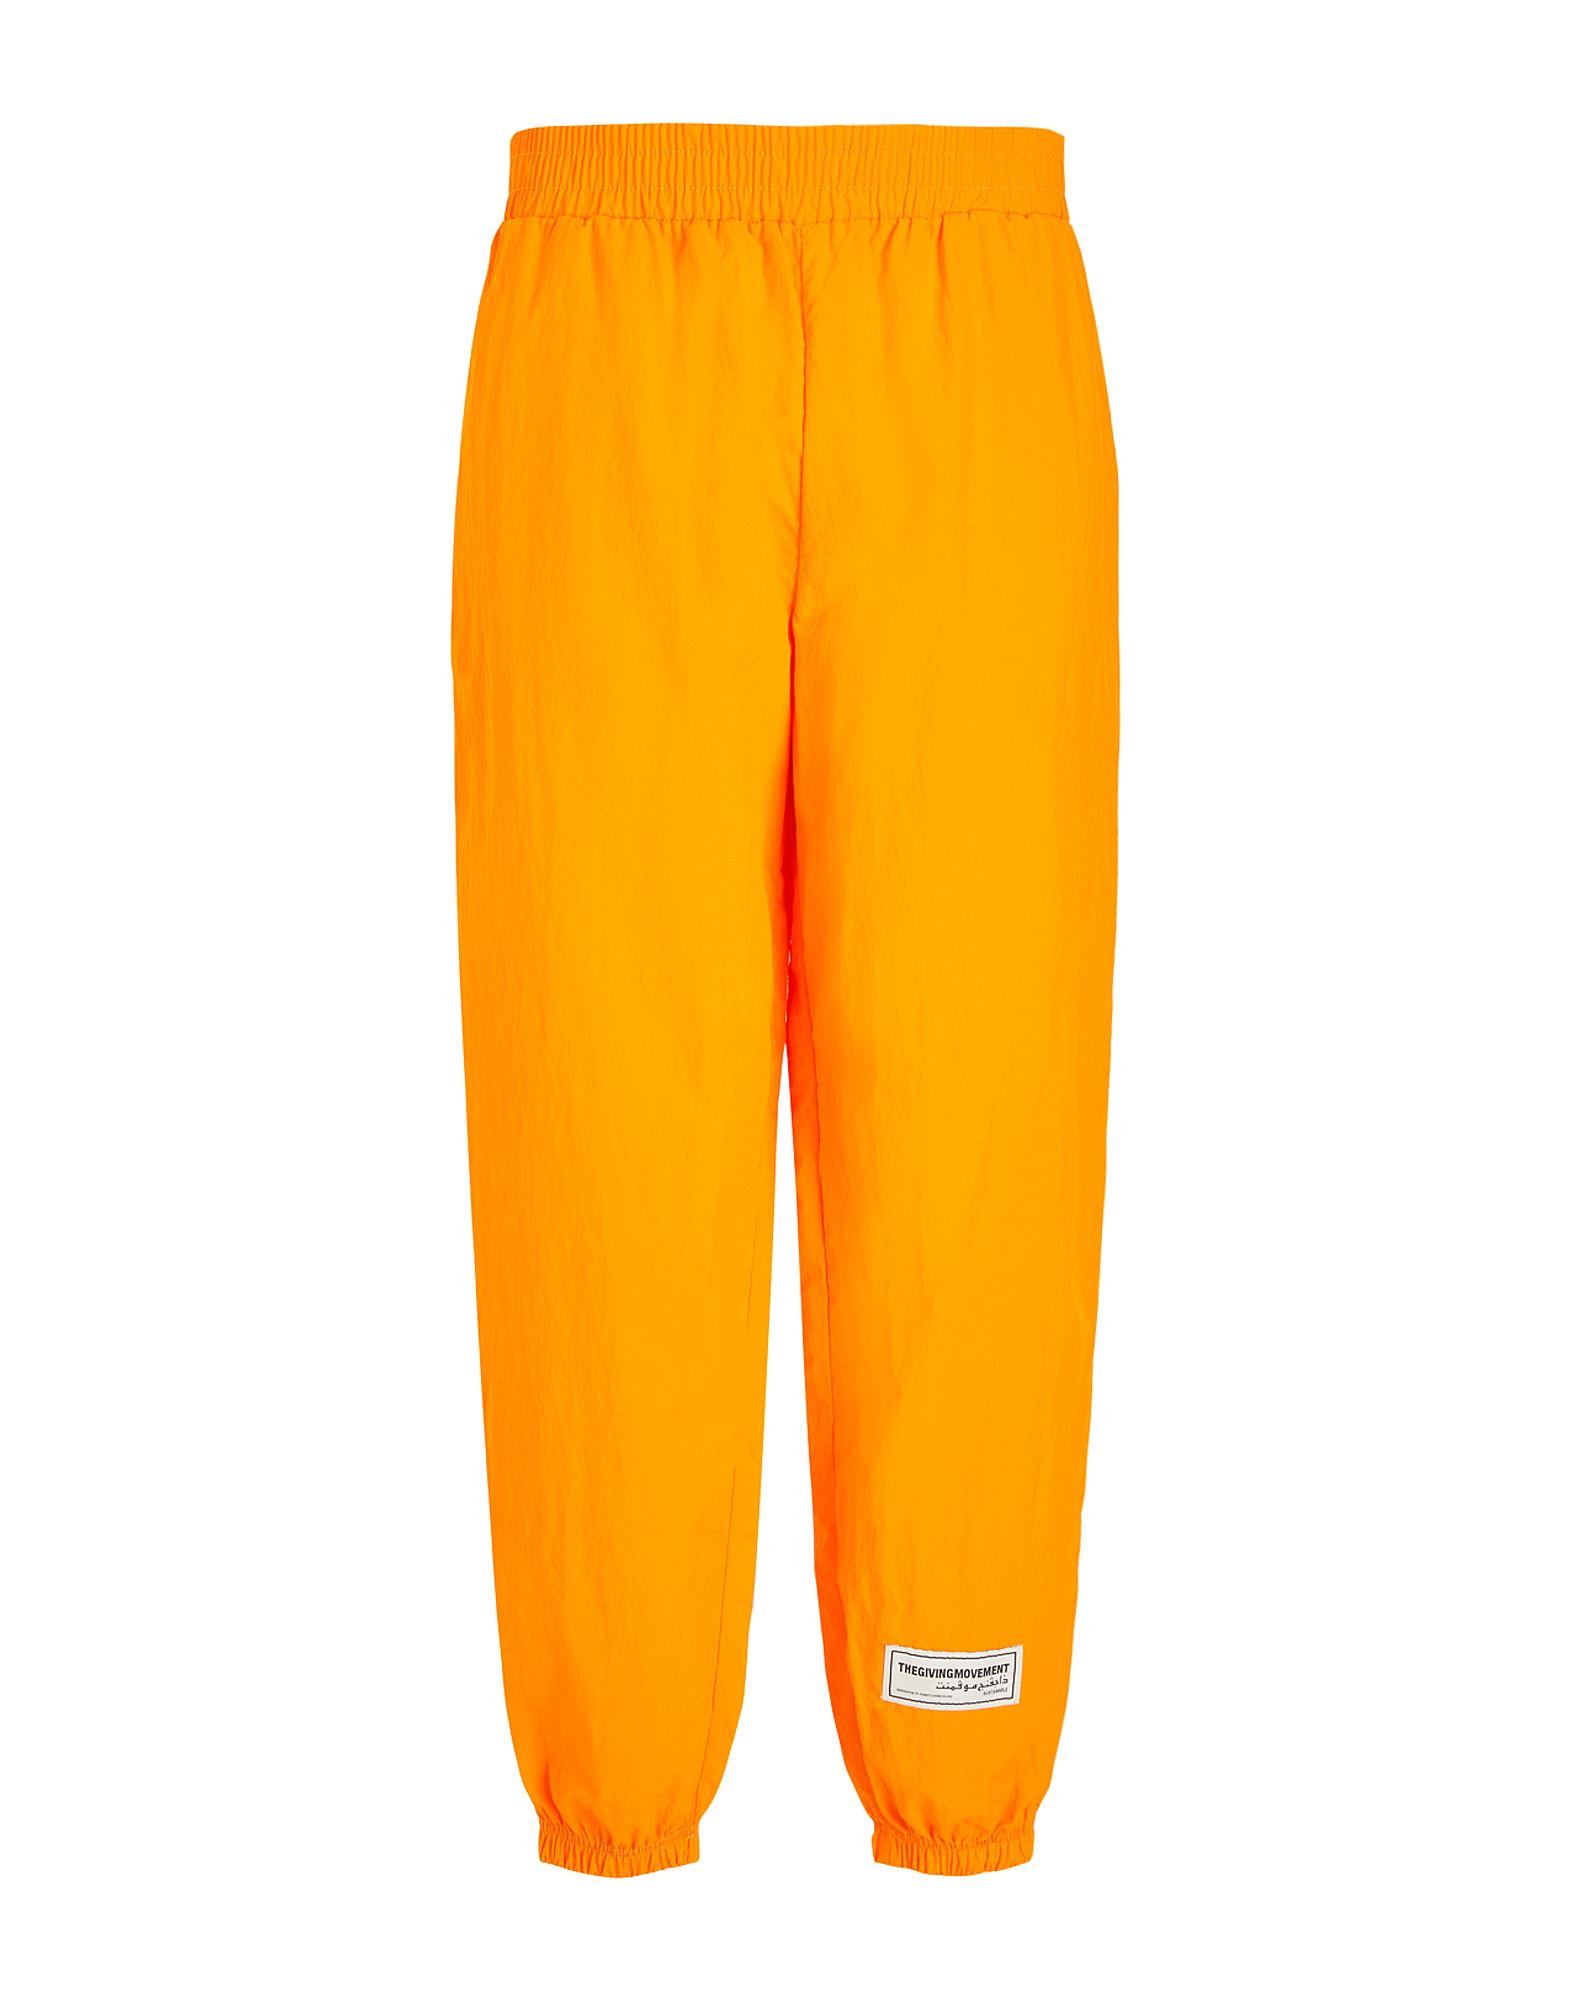 The Giving Movement X Yoox Pants In Orange